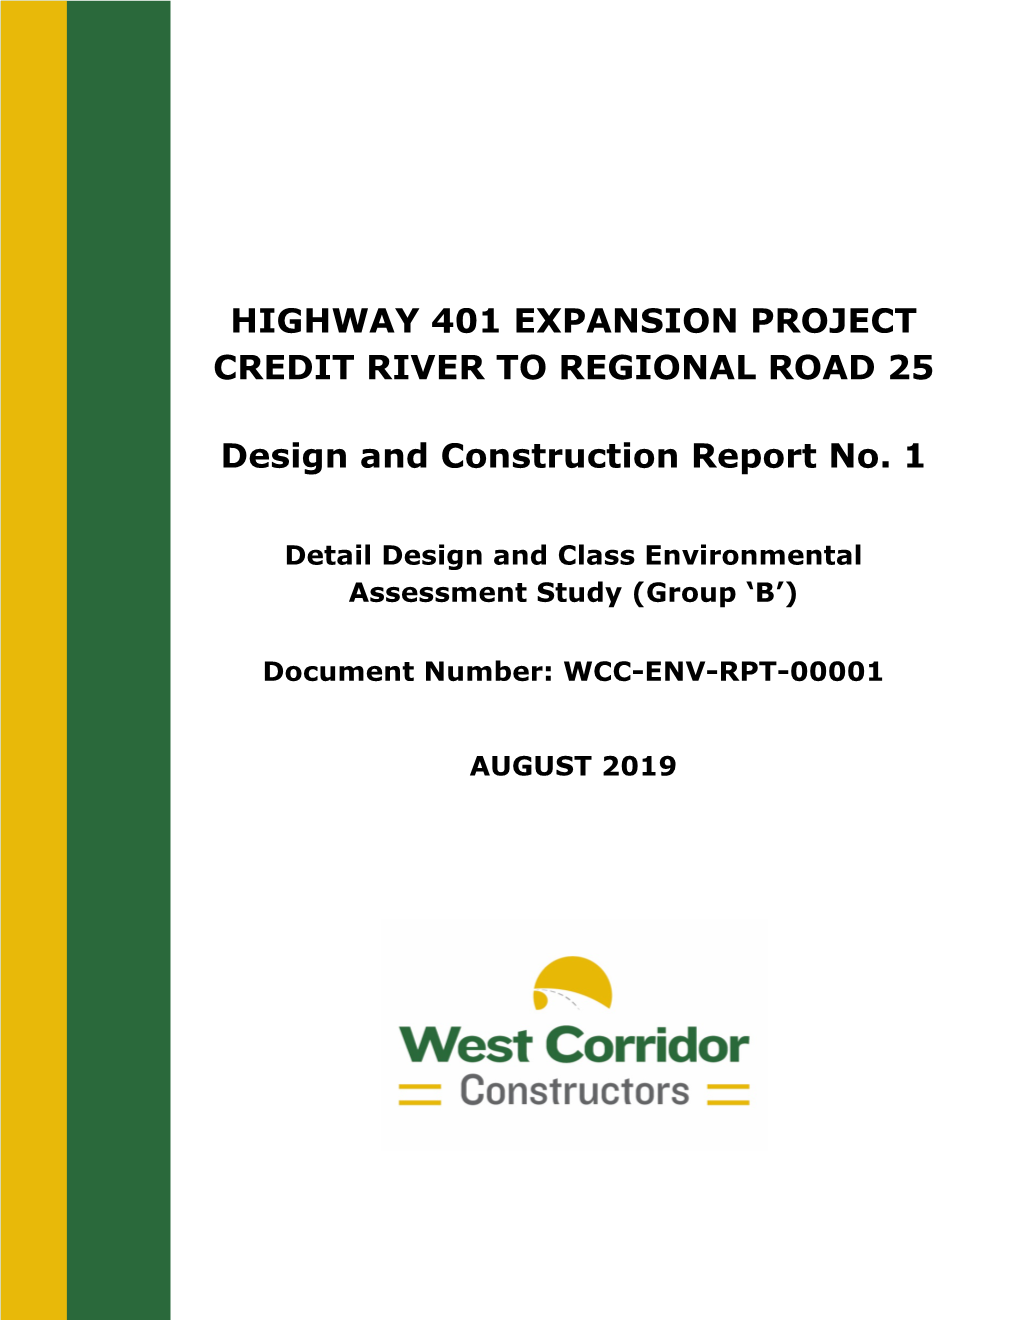 Highway 401 Expansion Project Credit River to Regional Road 25